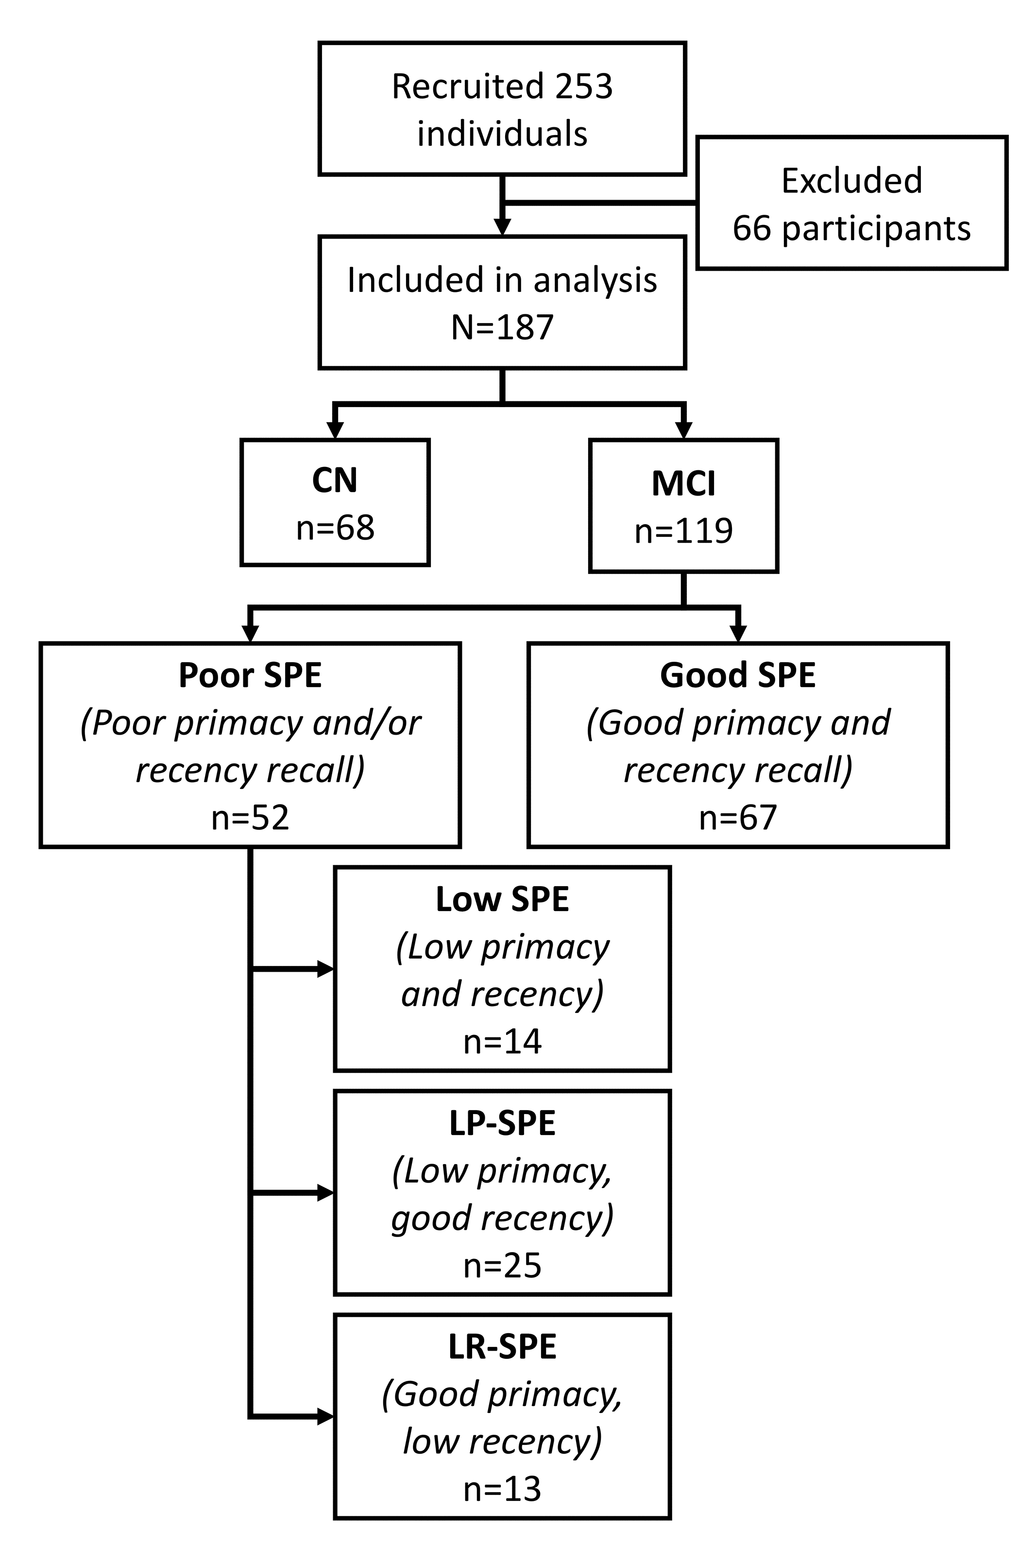 Flowchart for study recruitment and classification into study conditions by SPE performance. Abbreviations: AD-type: Alzheimer’s disease-type; CN: cognitively normal controls; LP-SPE: low primacy only serial position effect; LR-SPE: low recency only serial position effect; MCI: mild cognitive impairment; SPE: serial position effect.